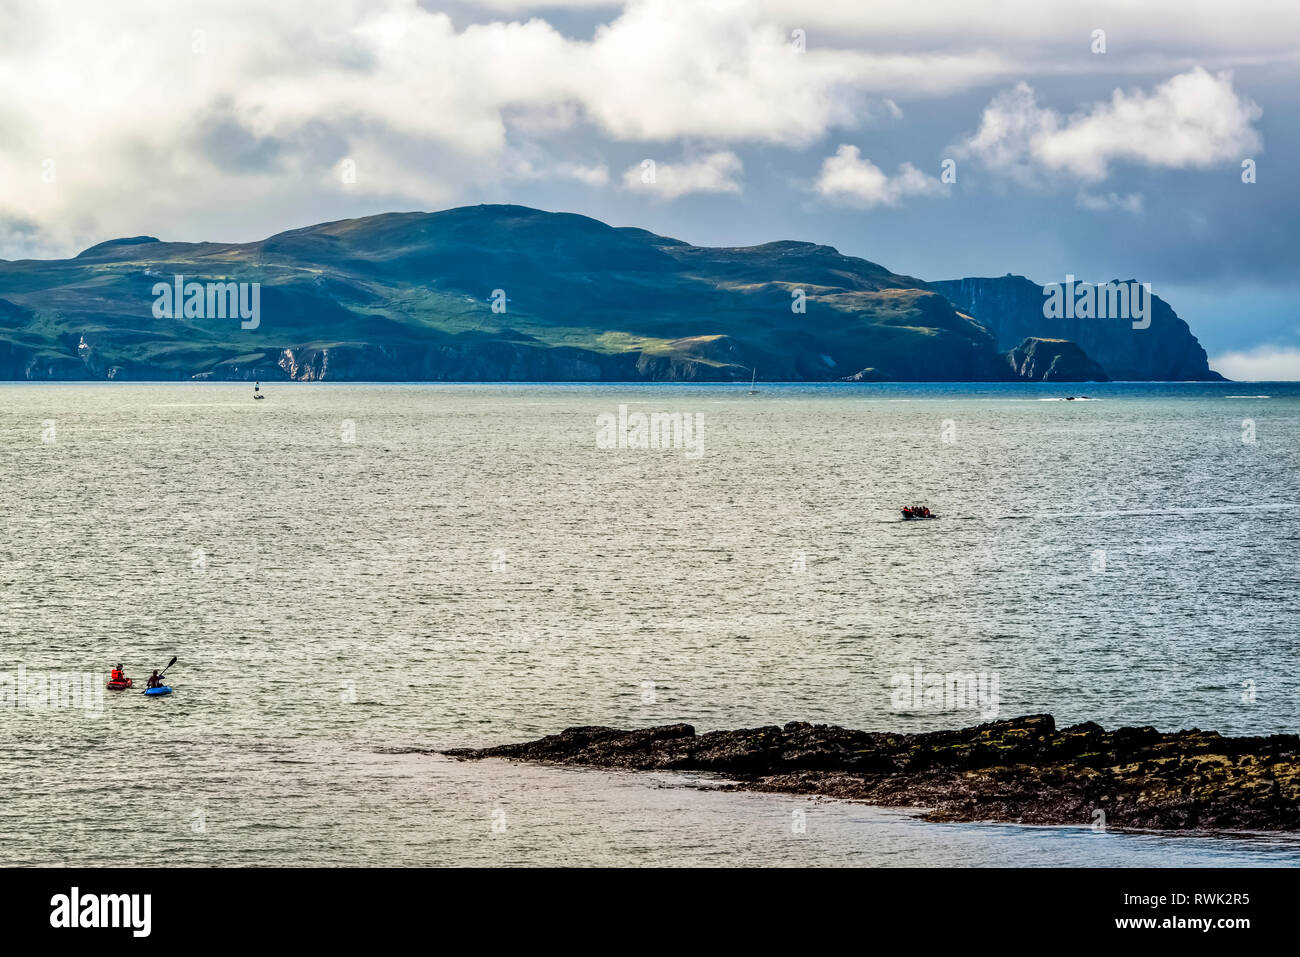 Kayaks and a boat in Sheephaven Bay; Downings, County Donegal, Ireland Stock Photo